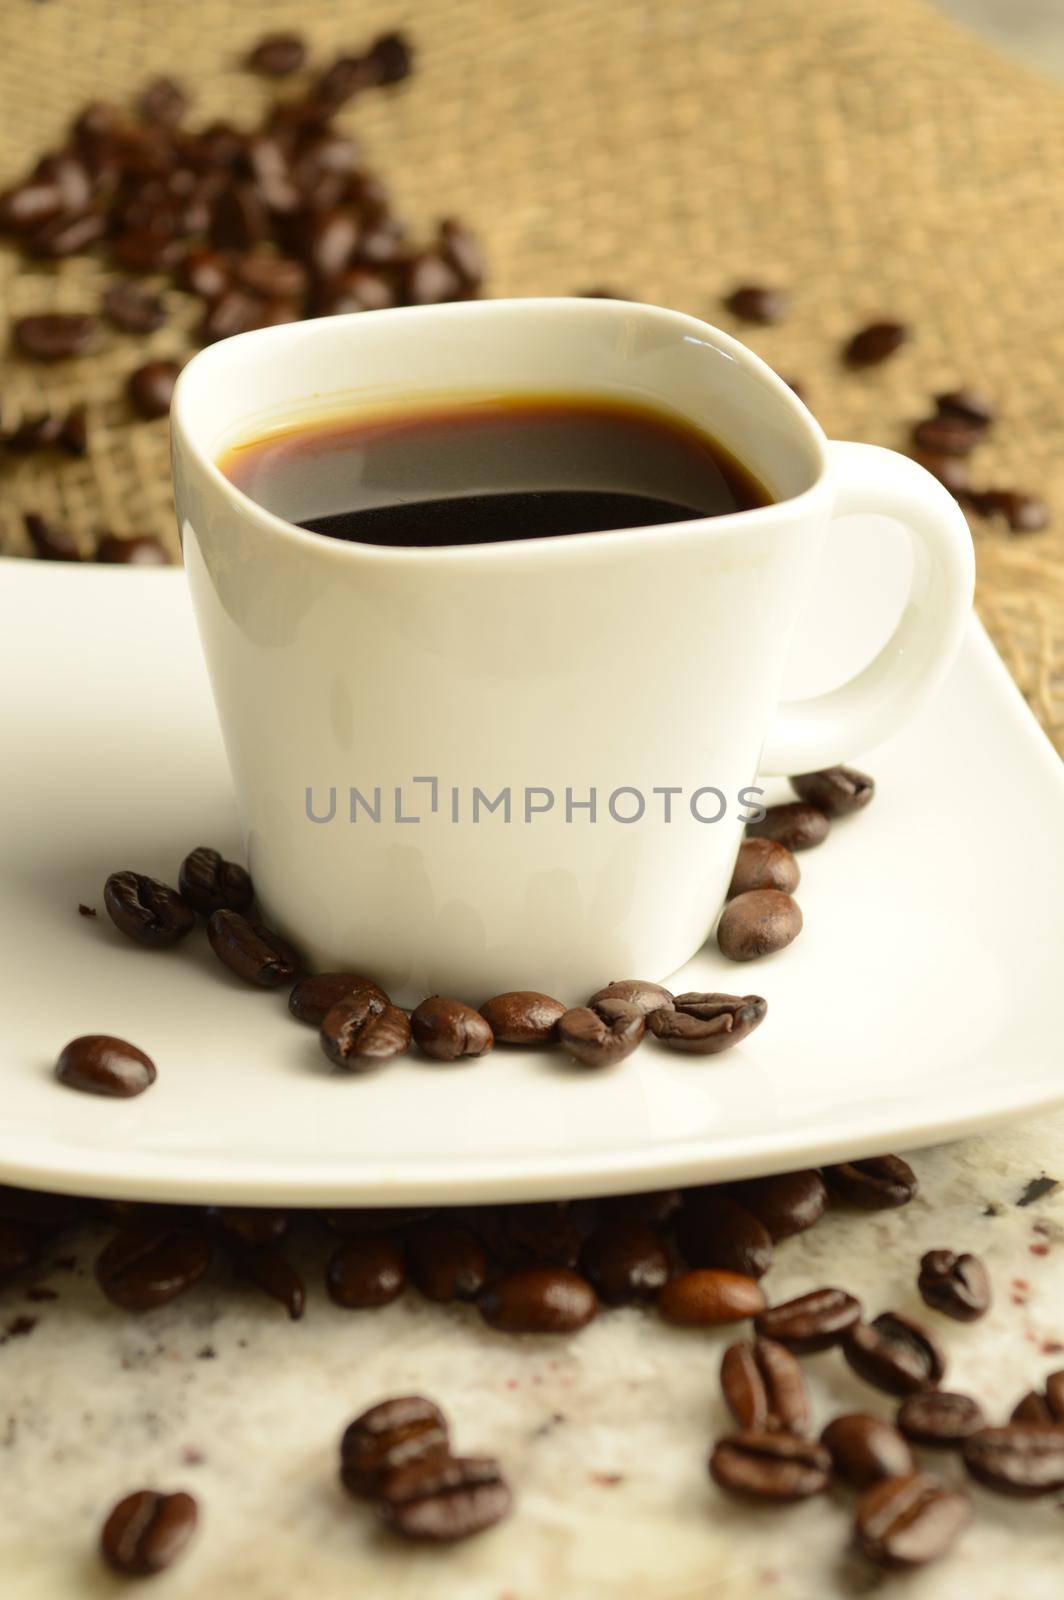 A single cup of espresso in an aromatic roasted coffee bean scene.